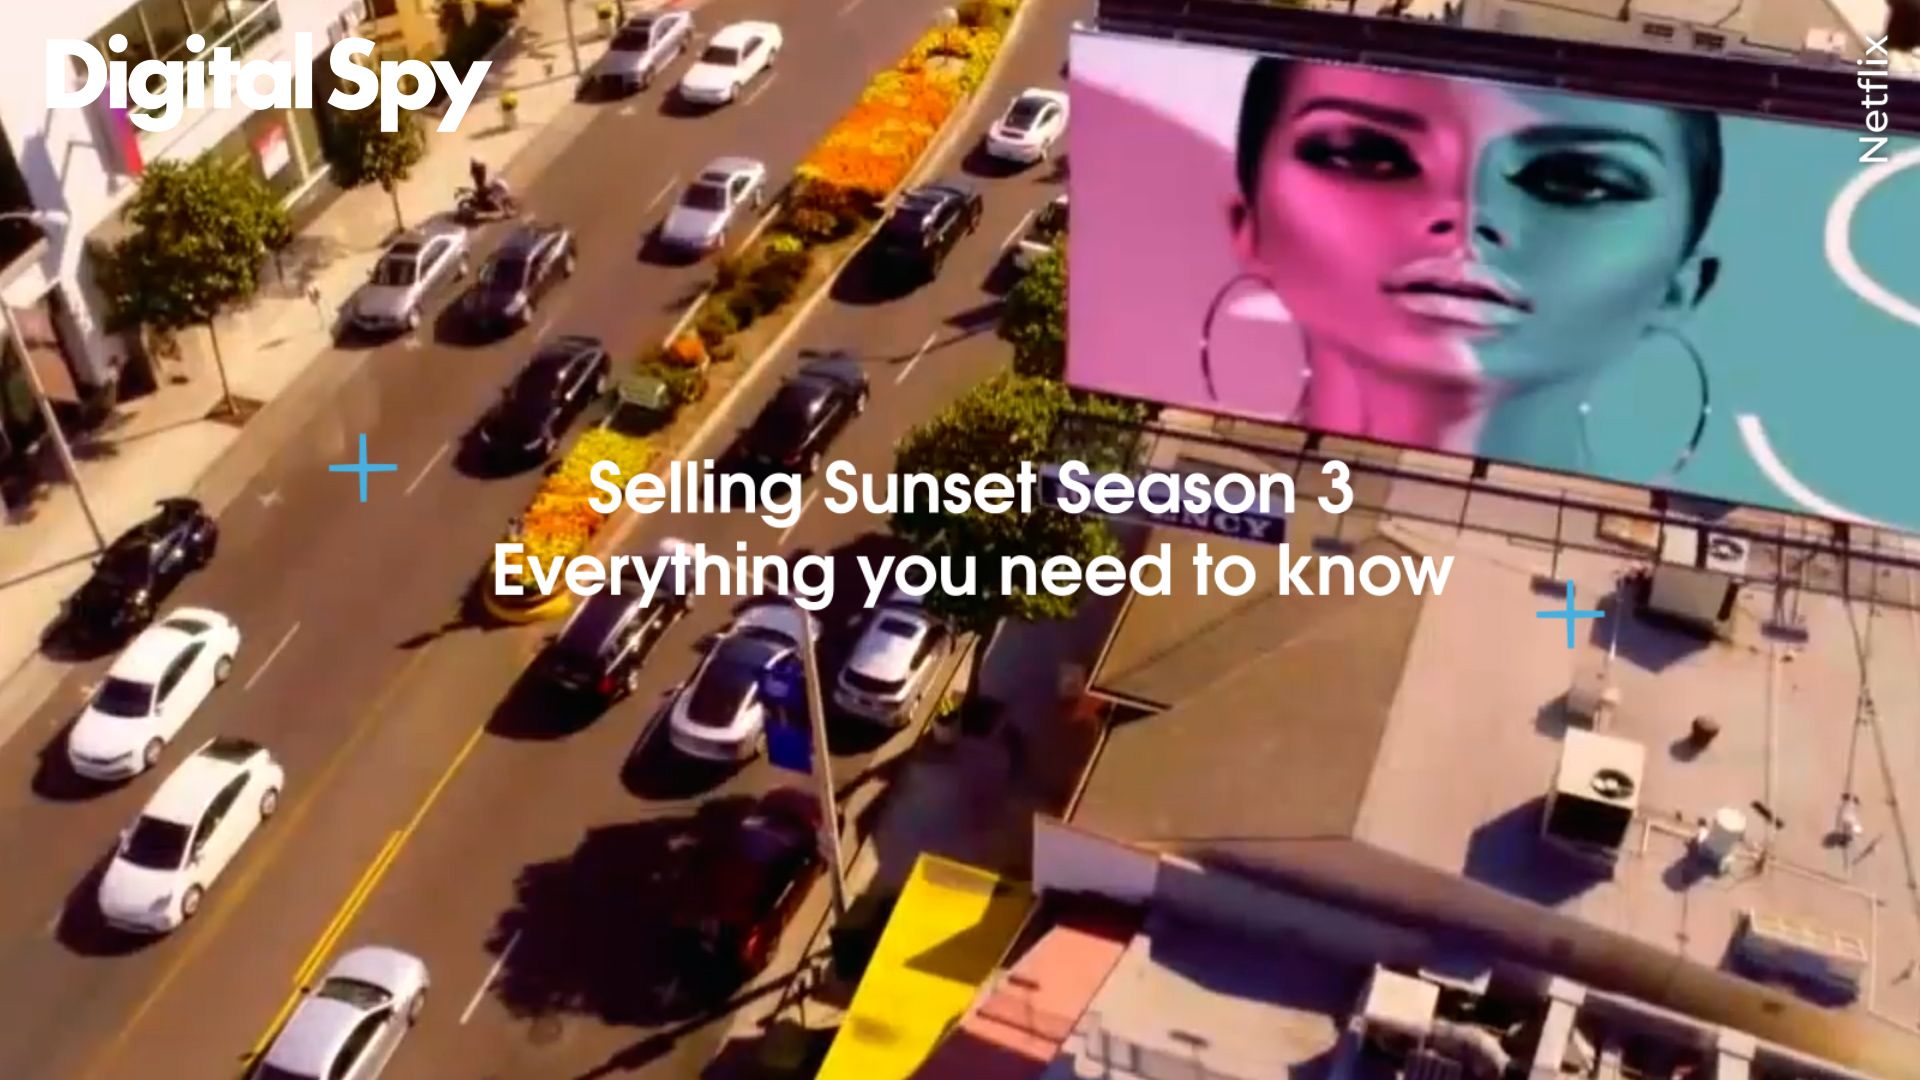 Watch a Sneak Peek of Season 3 of Selling Sunset With This Clip